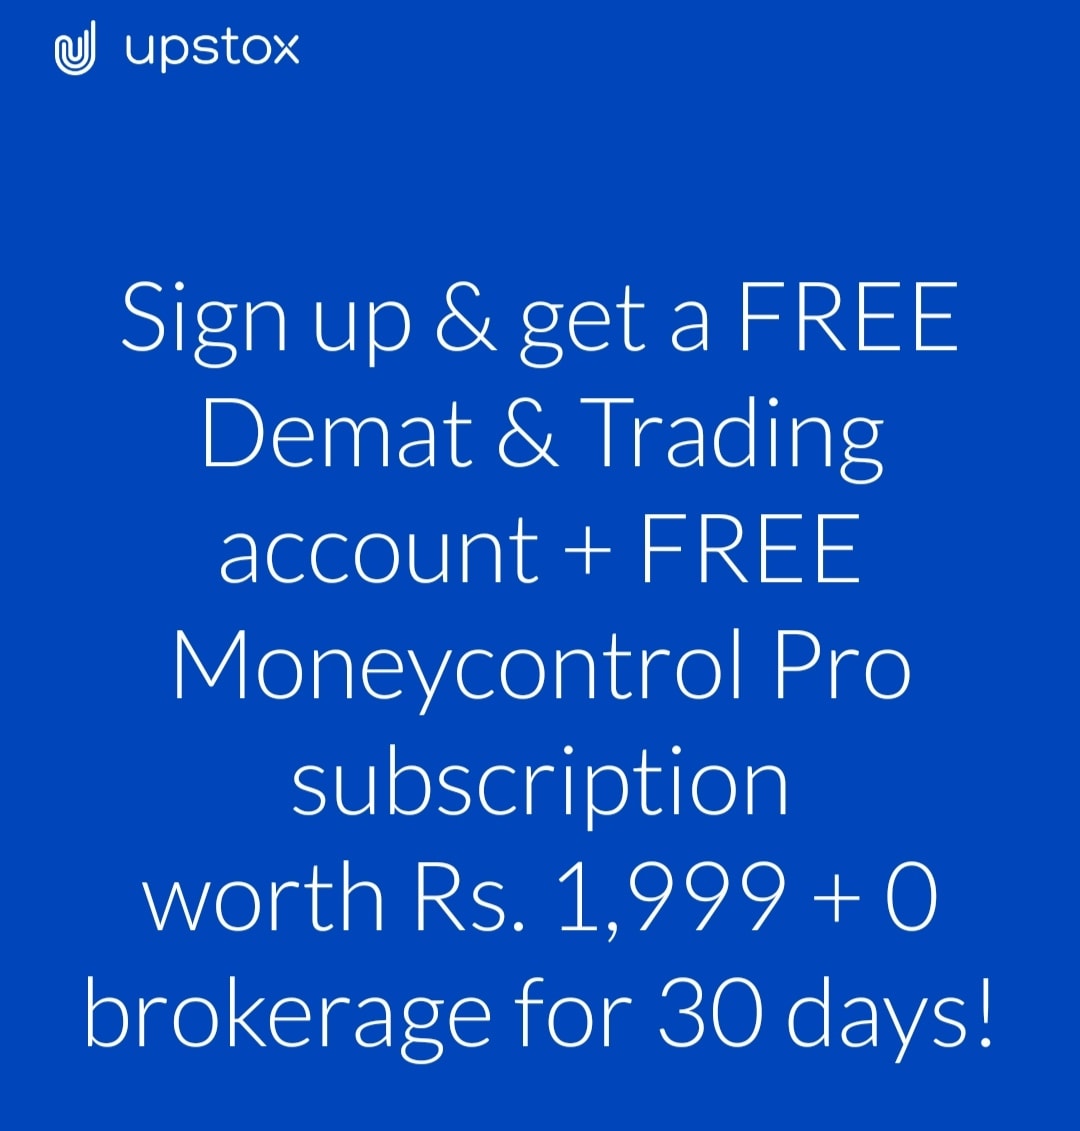 Click here to open Free Demat